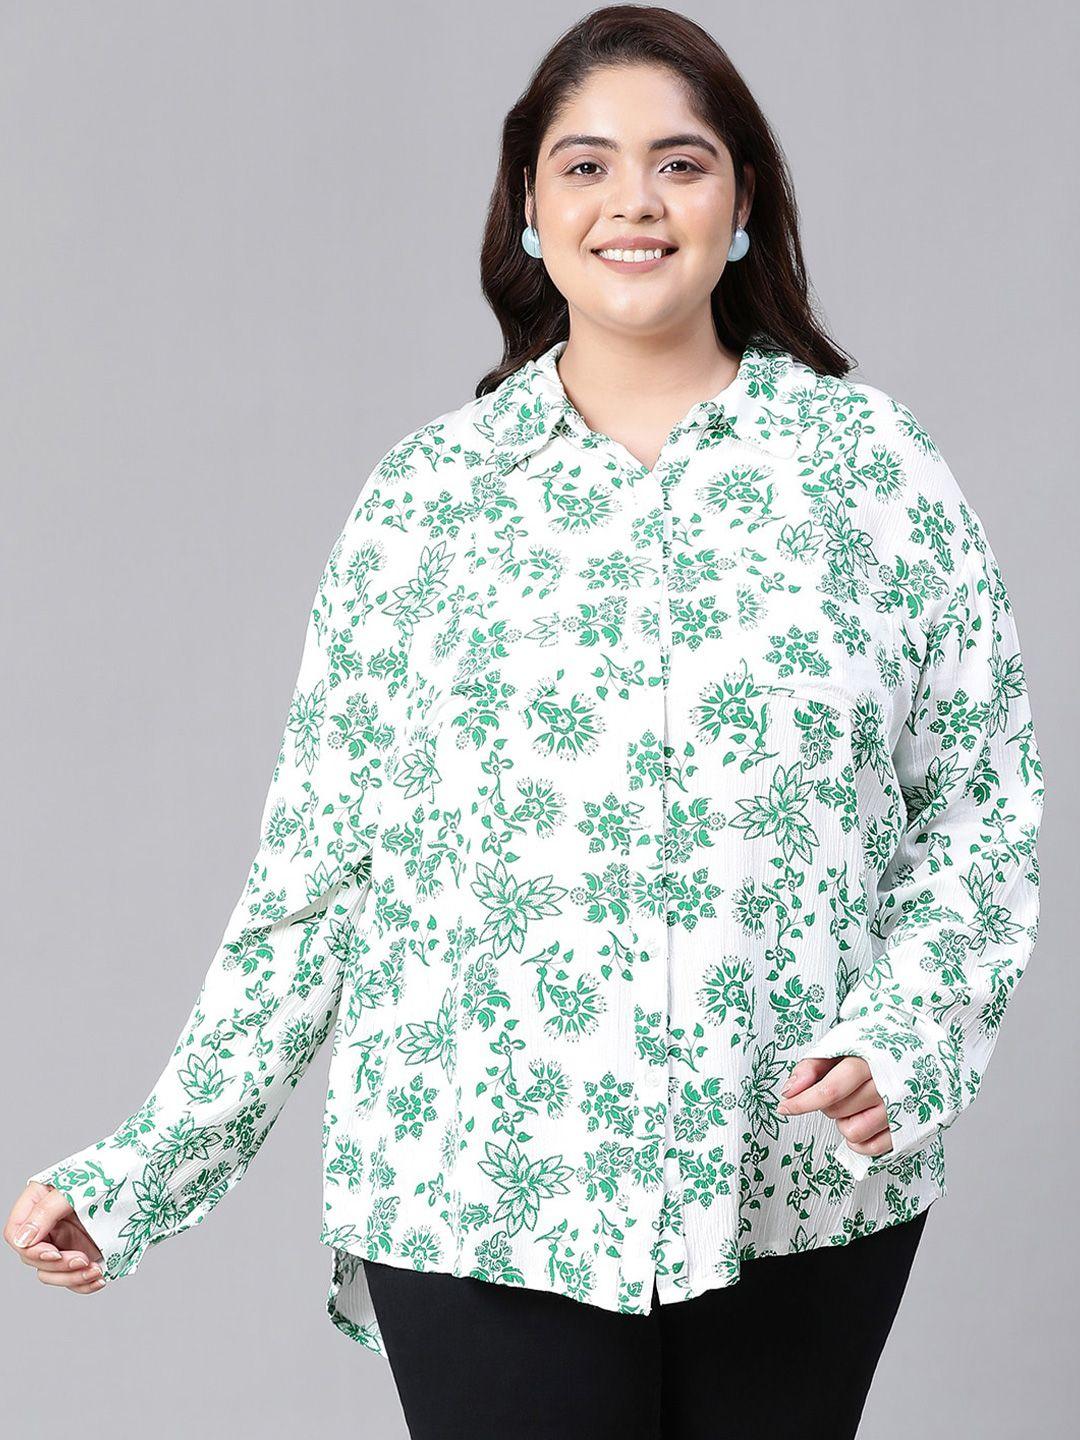 oxolloxo-plus-size-relaxed-fit-floral-printed-casual-shirt